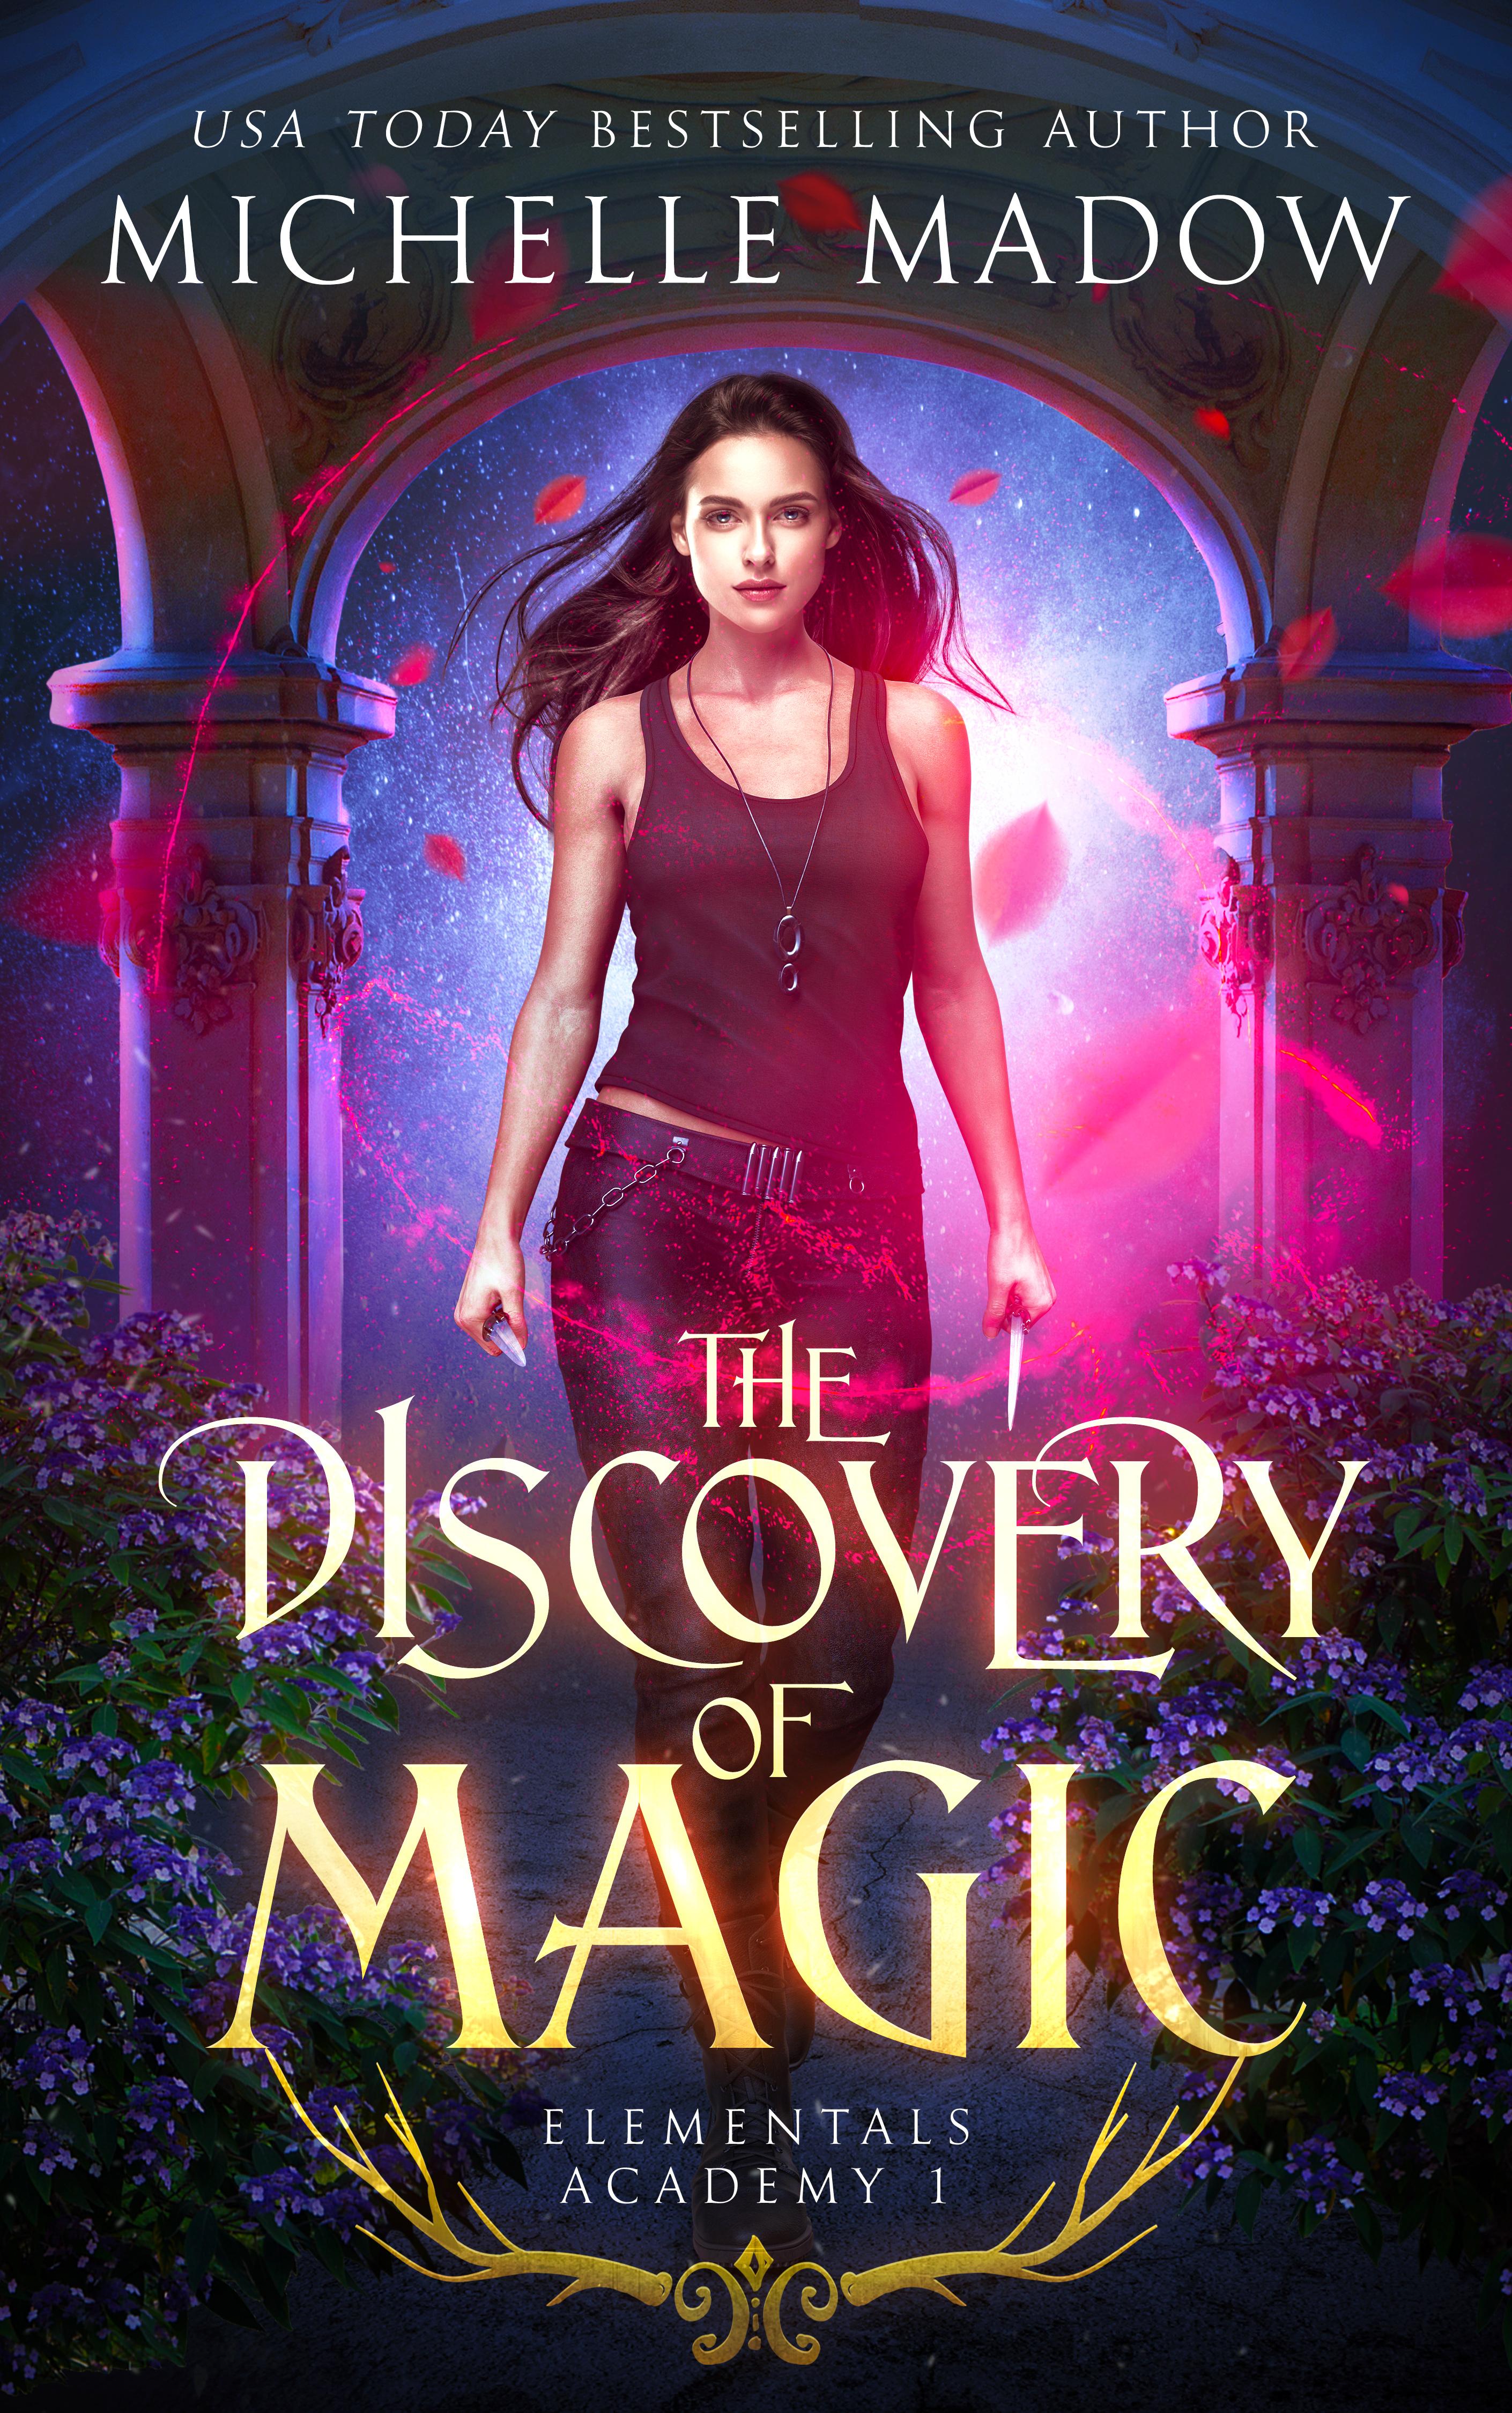 The Discovery of Magic